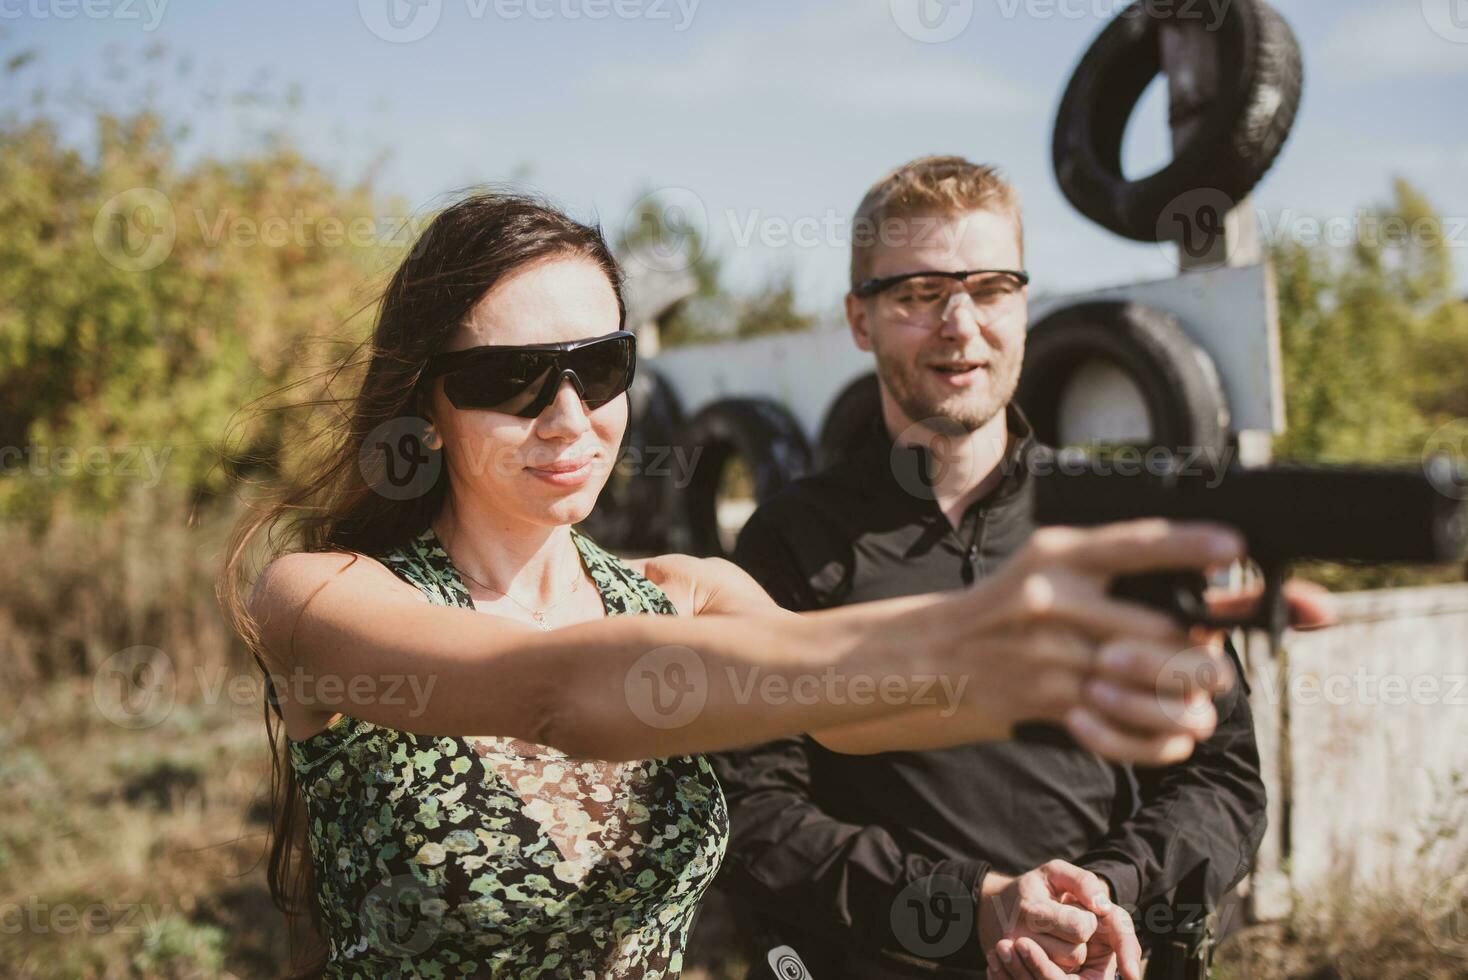 A girl learns to shoot a pistol at a shooting range with an instructor photo